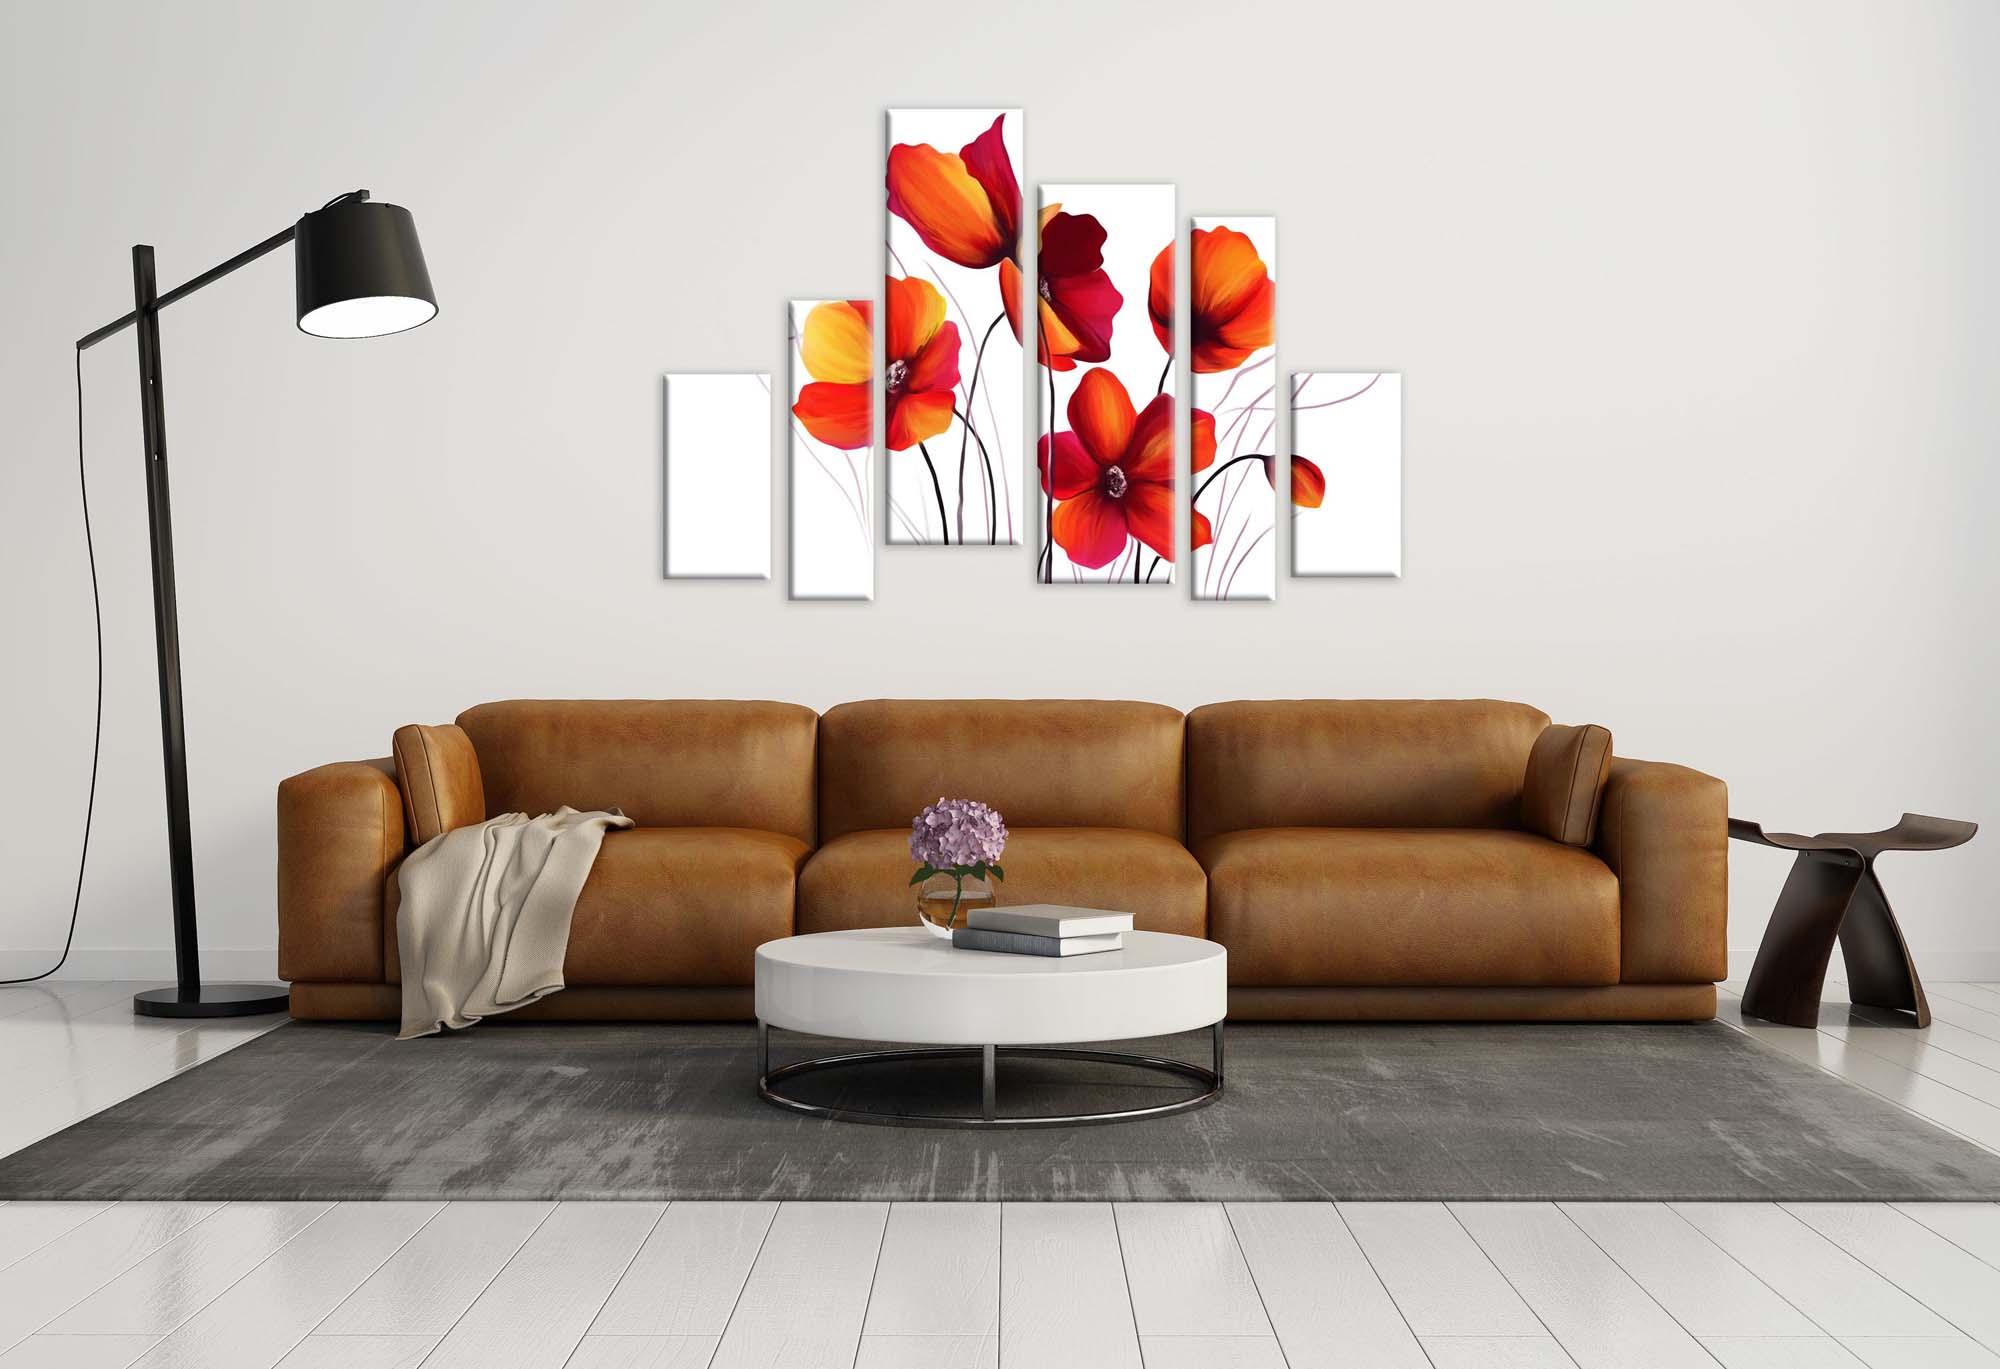 Picture Modular picture - poppies on a white background 2